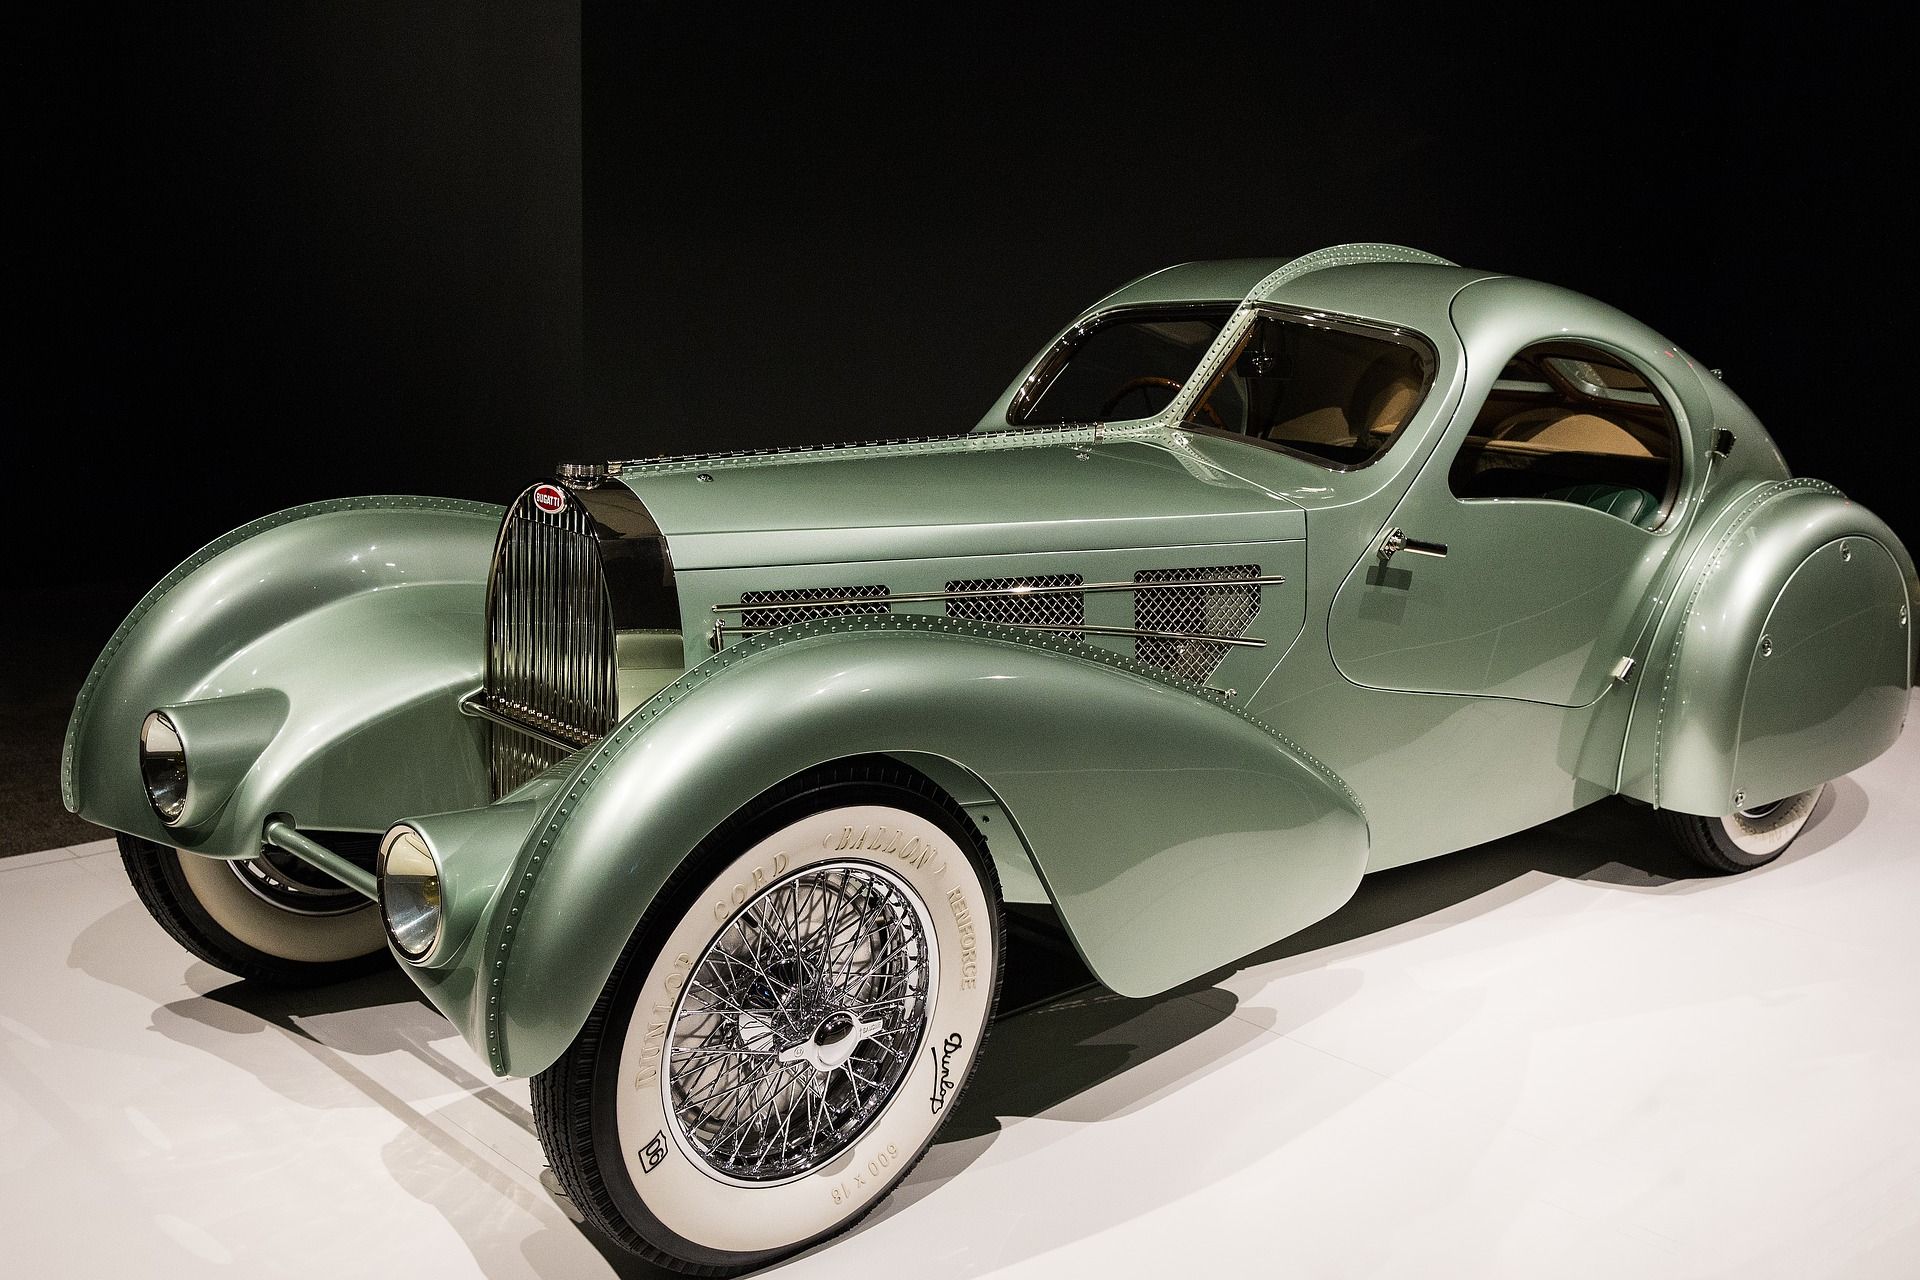 Ralph Lauren's classic car collection: art you can drive